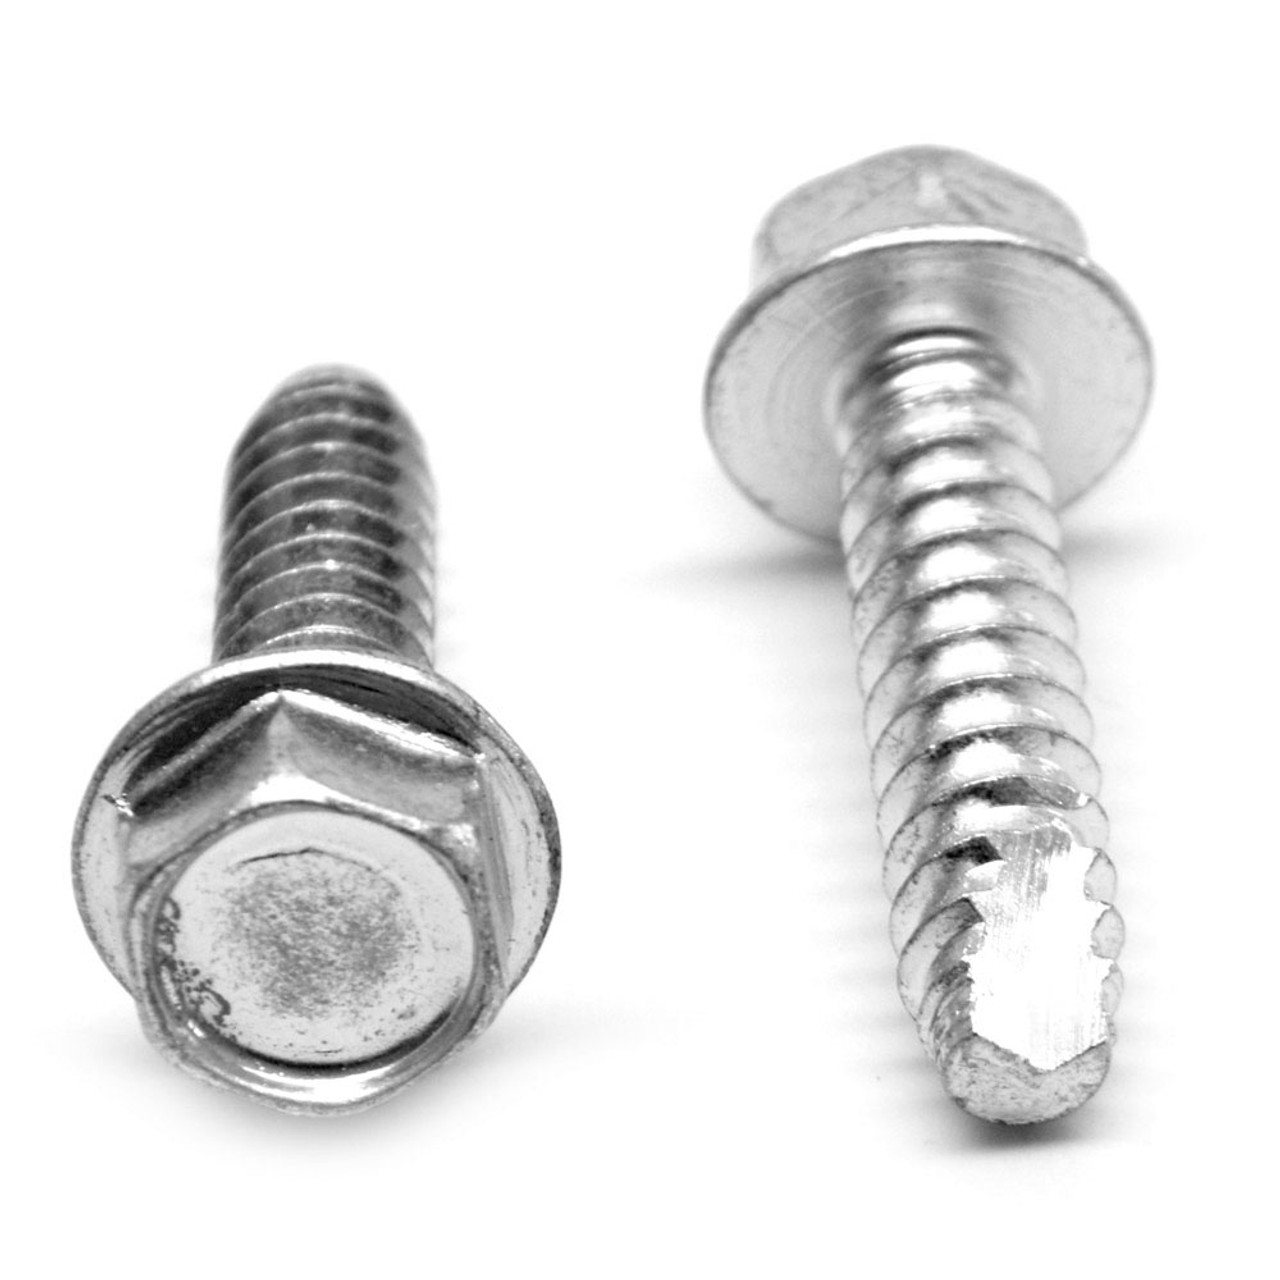 1/4-14 x 3/4 Thread Cutting Screw Hex Washer Head Type 25 Low Carbon Steel Zinc Plated